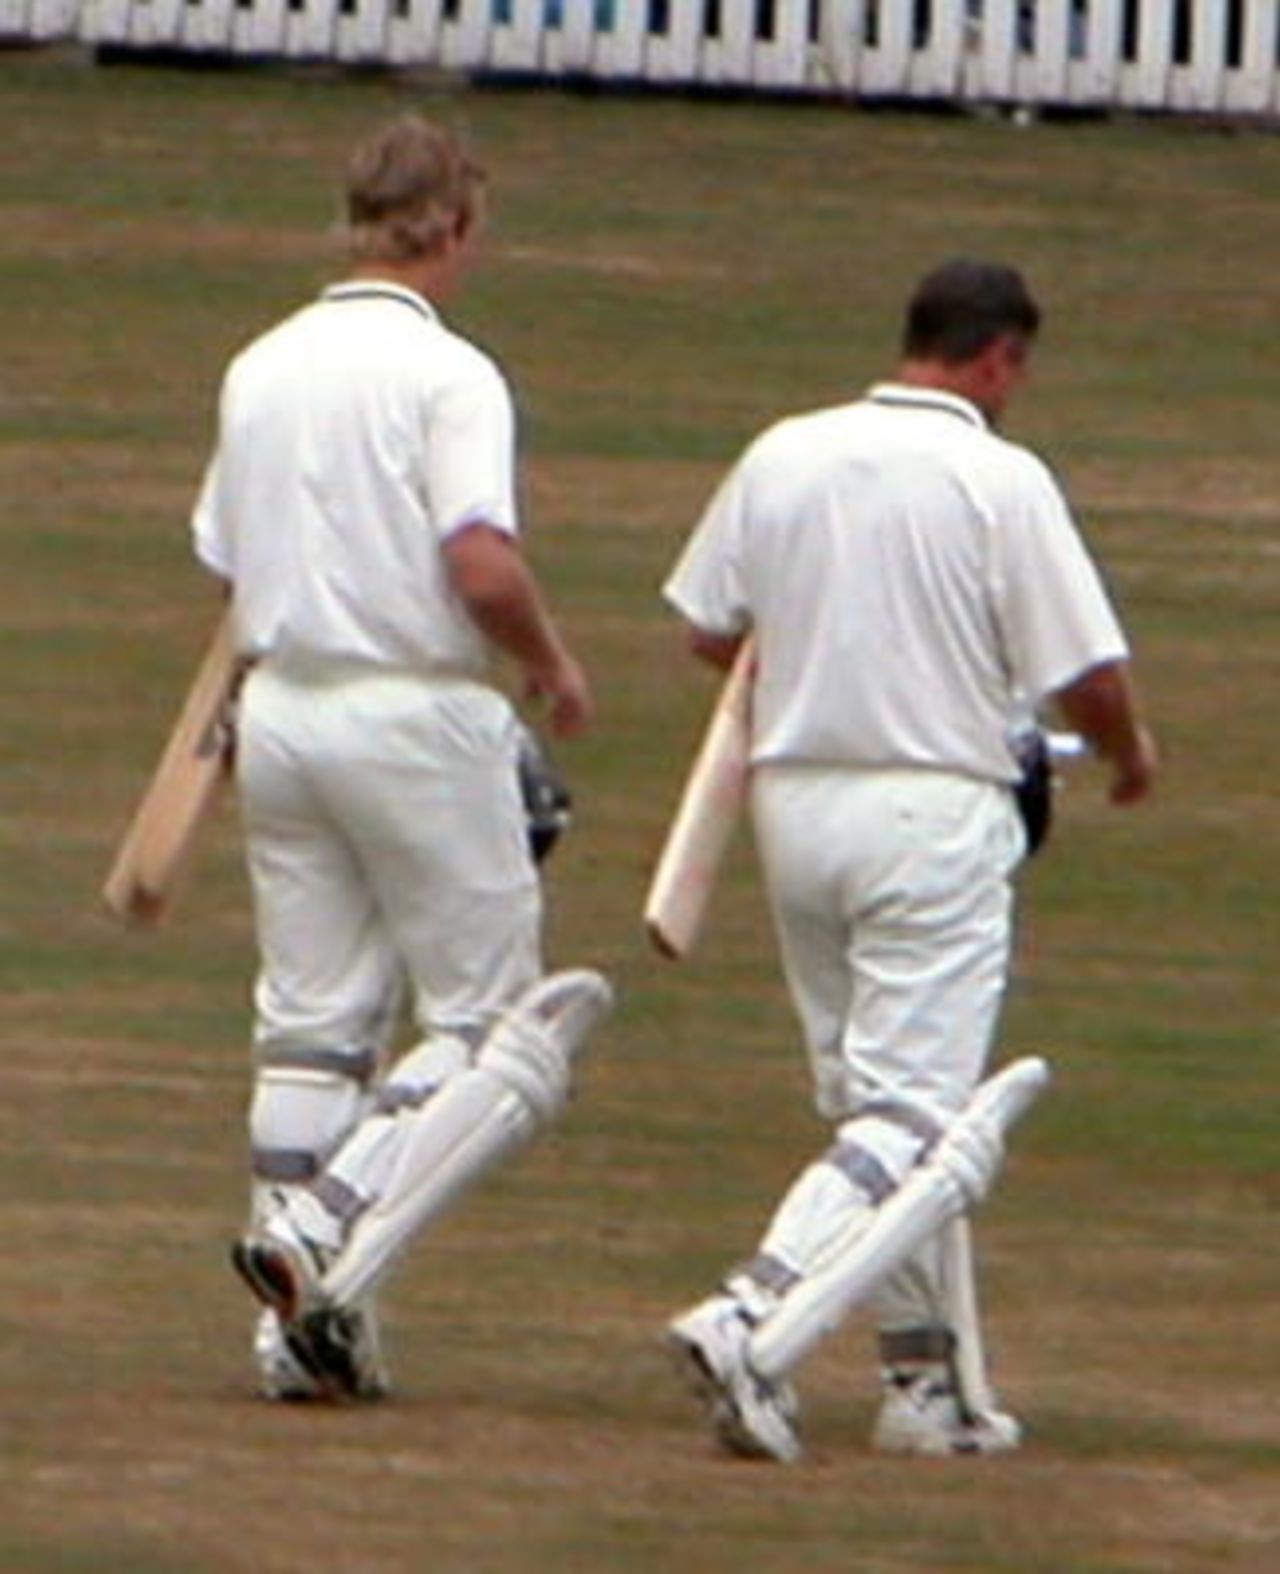 Robin Smith walks off the field with runner Jimmy Adams at Taunton in what proved to be his last ever innings for Hampshire.